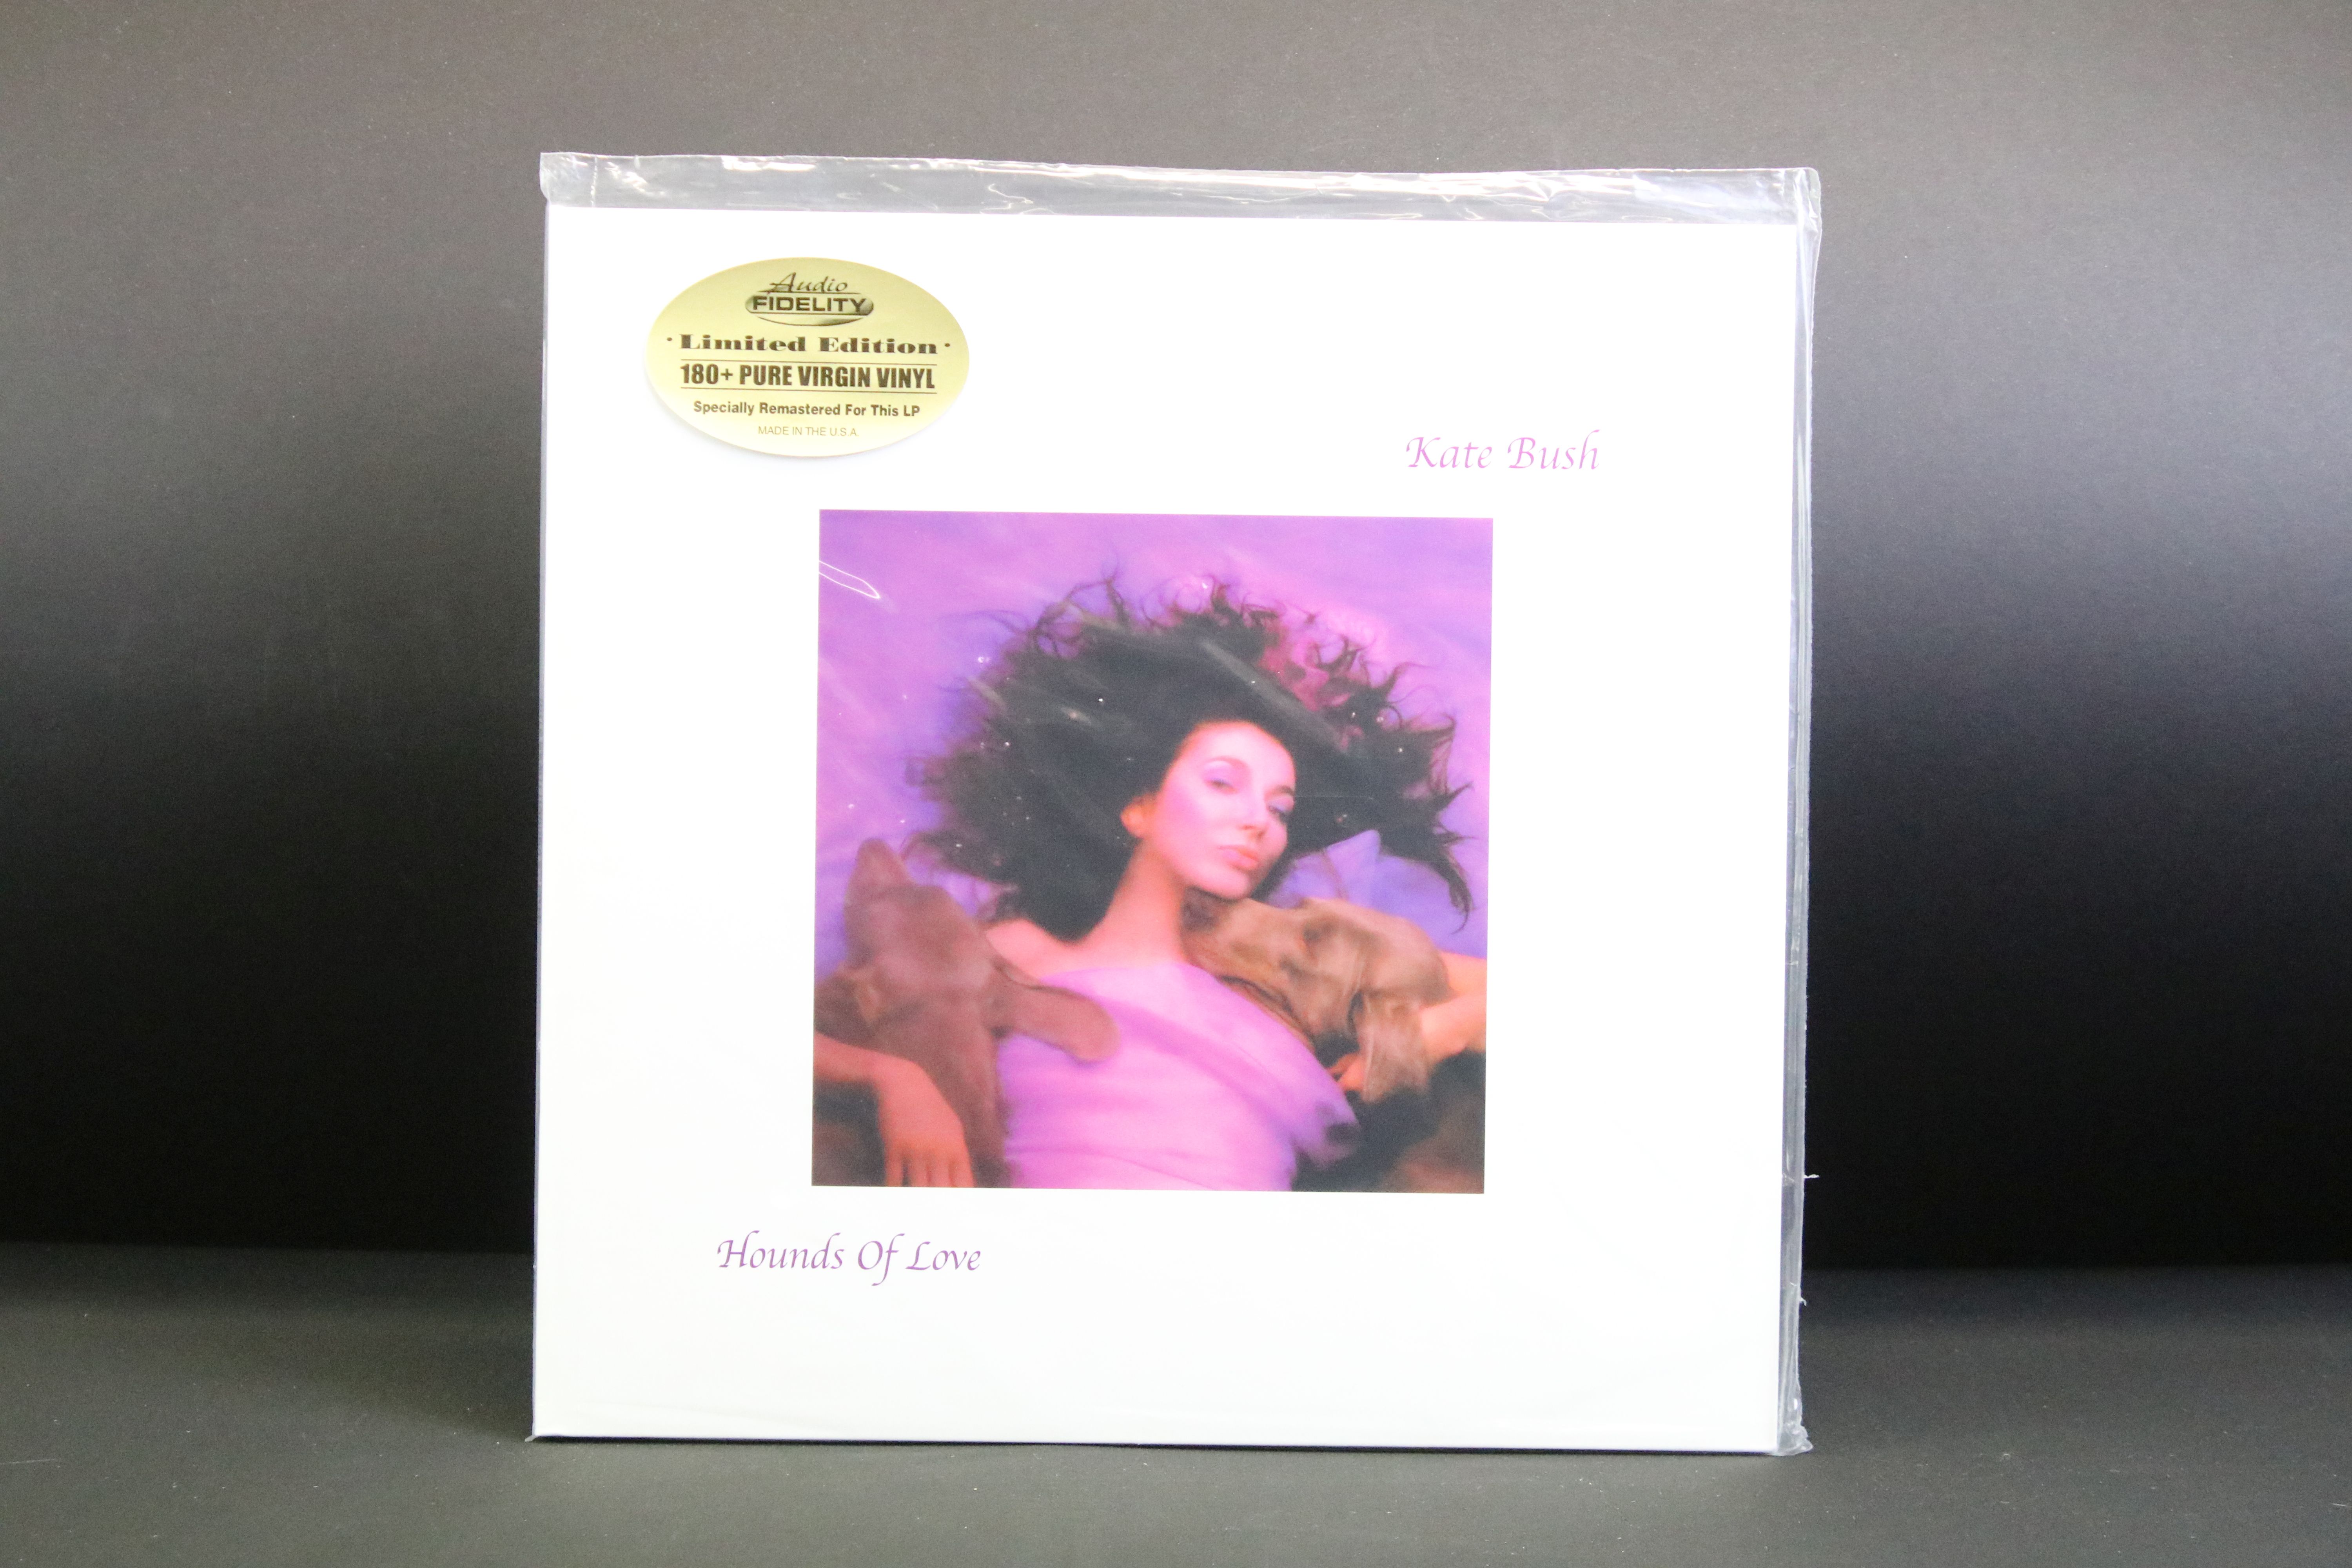 Vinyl - 3 sealed reissue LPs to include Kate Bush Hounds Of Love (AFZLP 087) Audio Fidelity ltd - Image 2 of 7